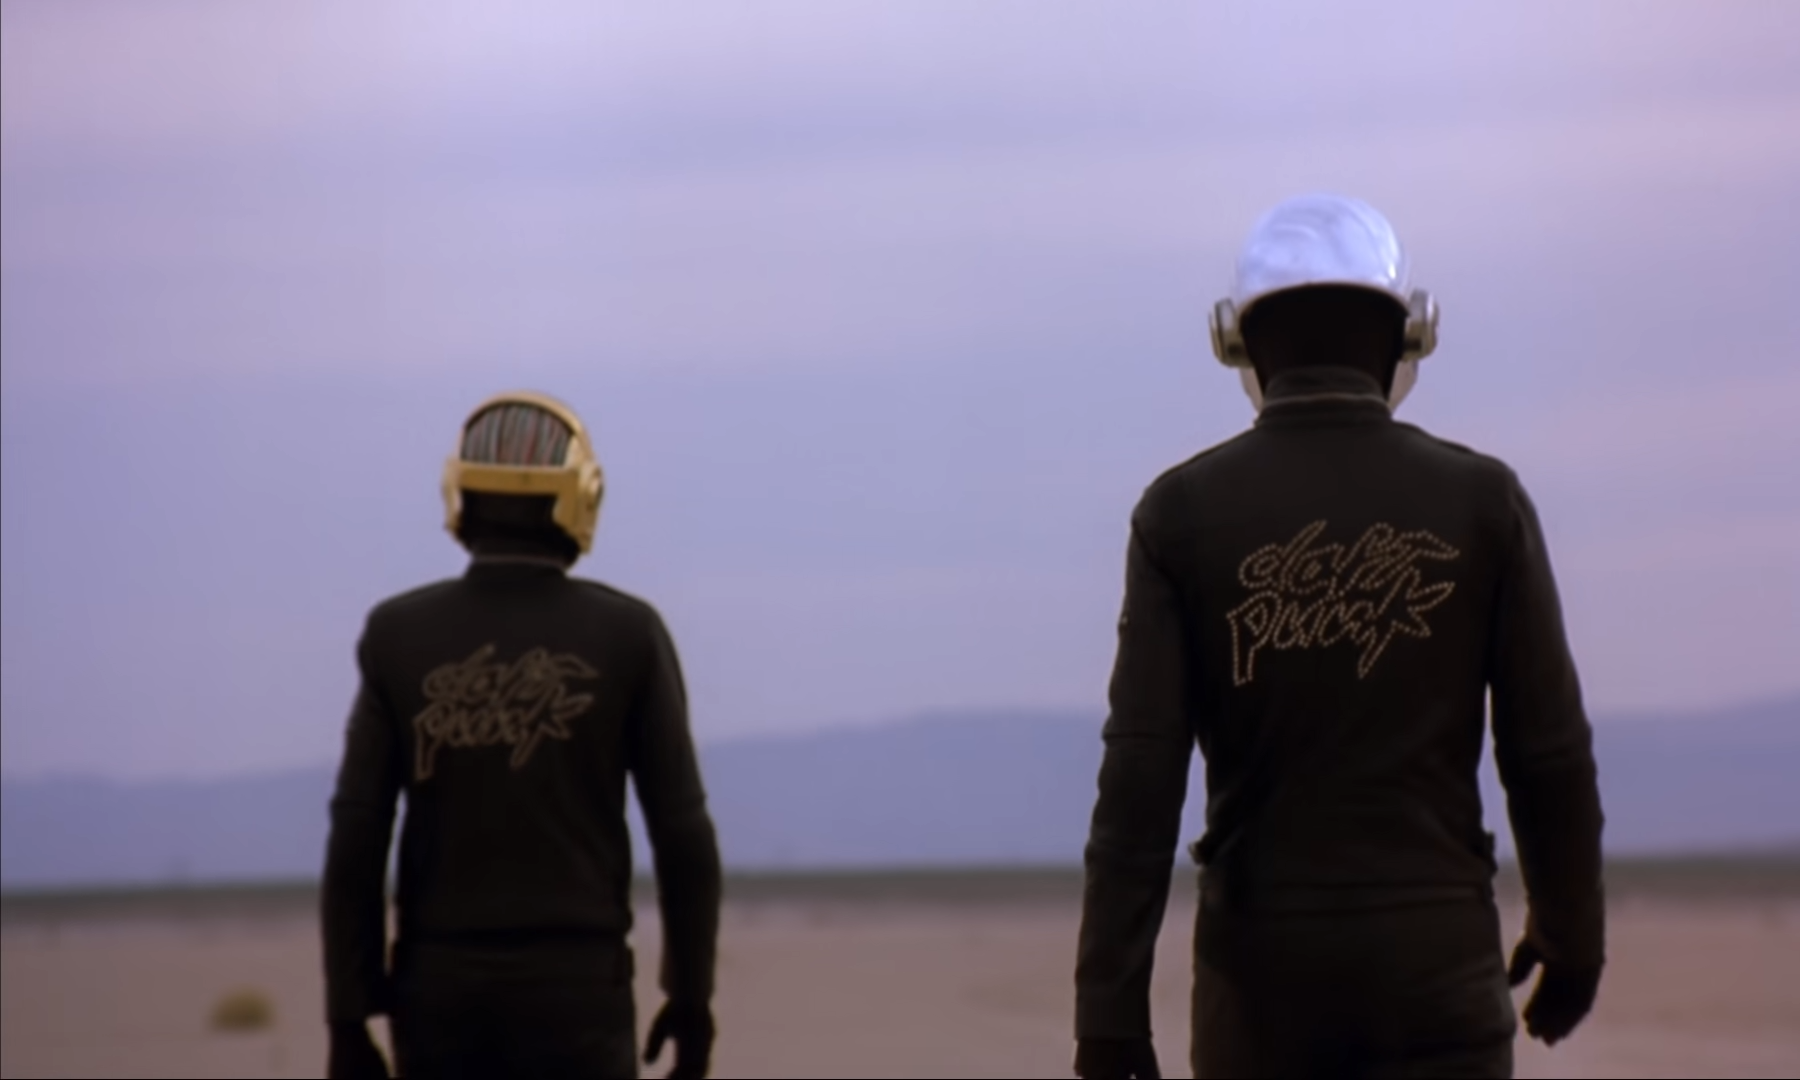 Daft Punk's retirement closes the book on an era of electronic music